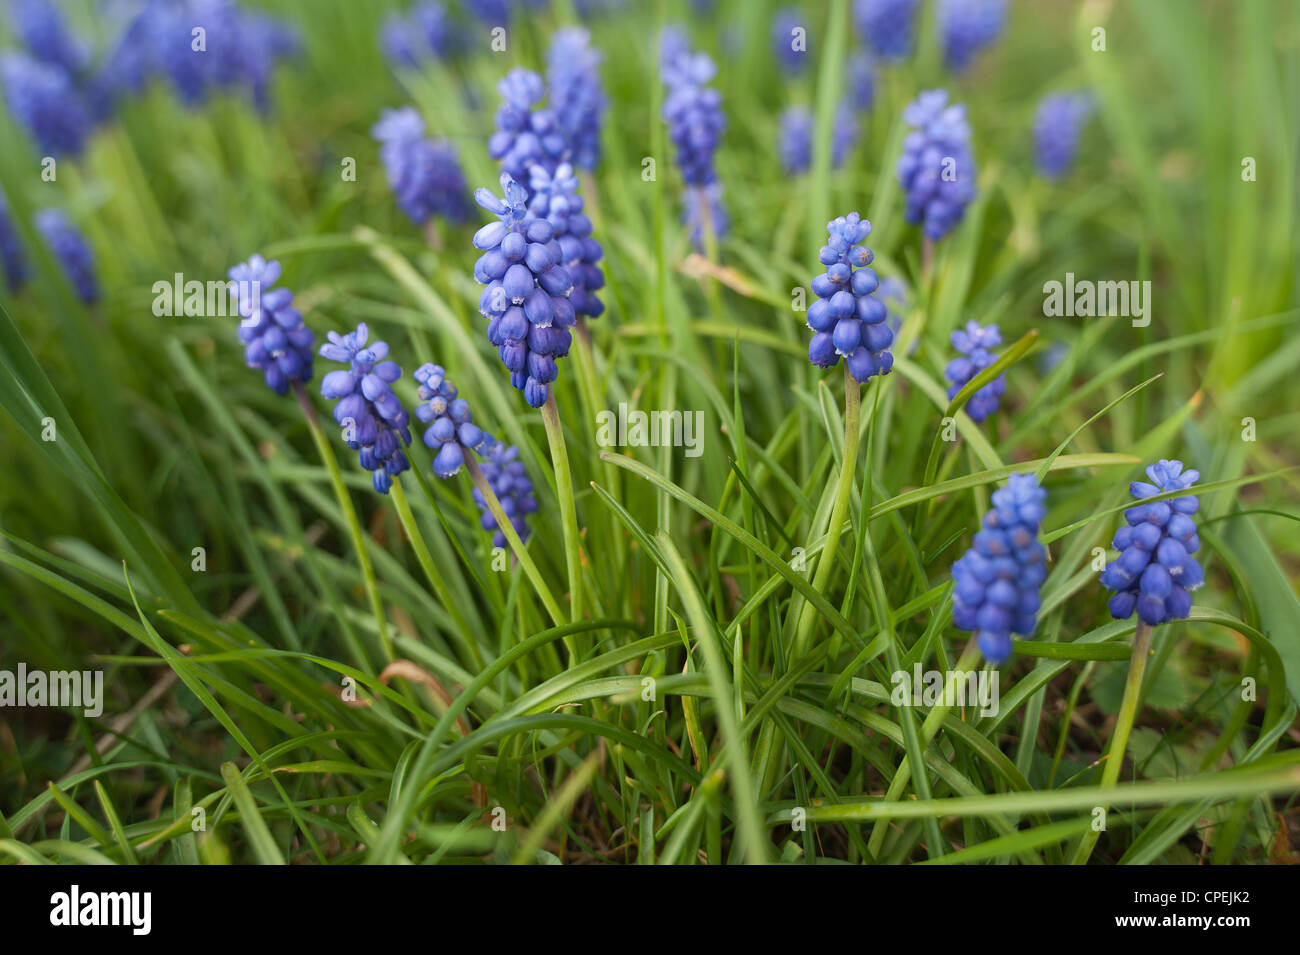 Small grape hyacinth flowering in Spring common grape hyacinth Muscari botryoides amongst germinating grass Stock Photo